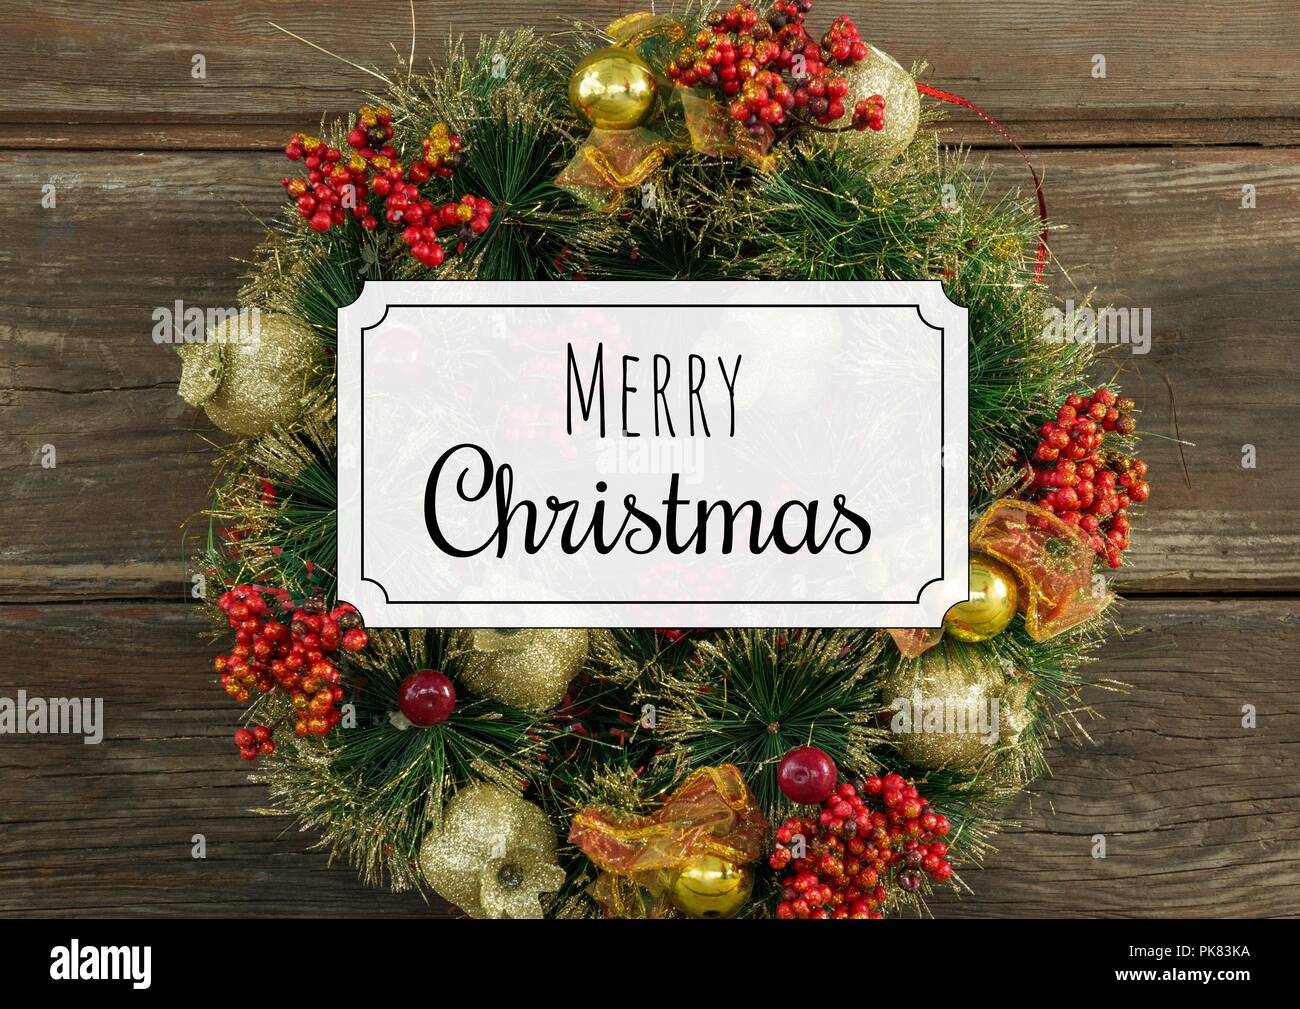 Merry Christmas text with wreath Stock Photo